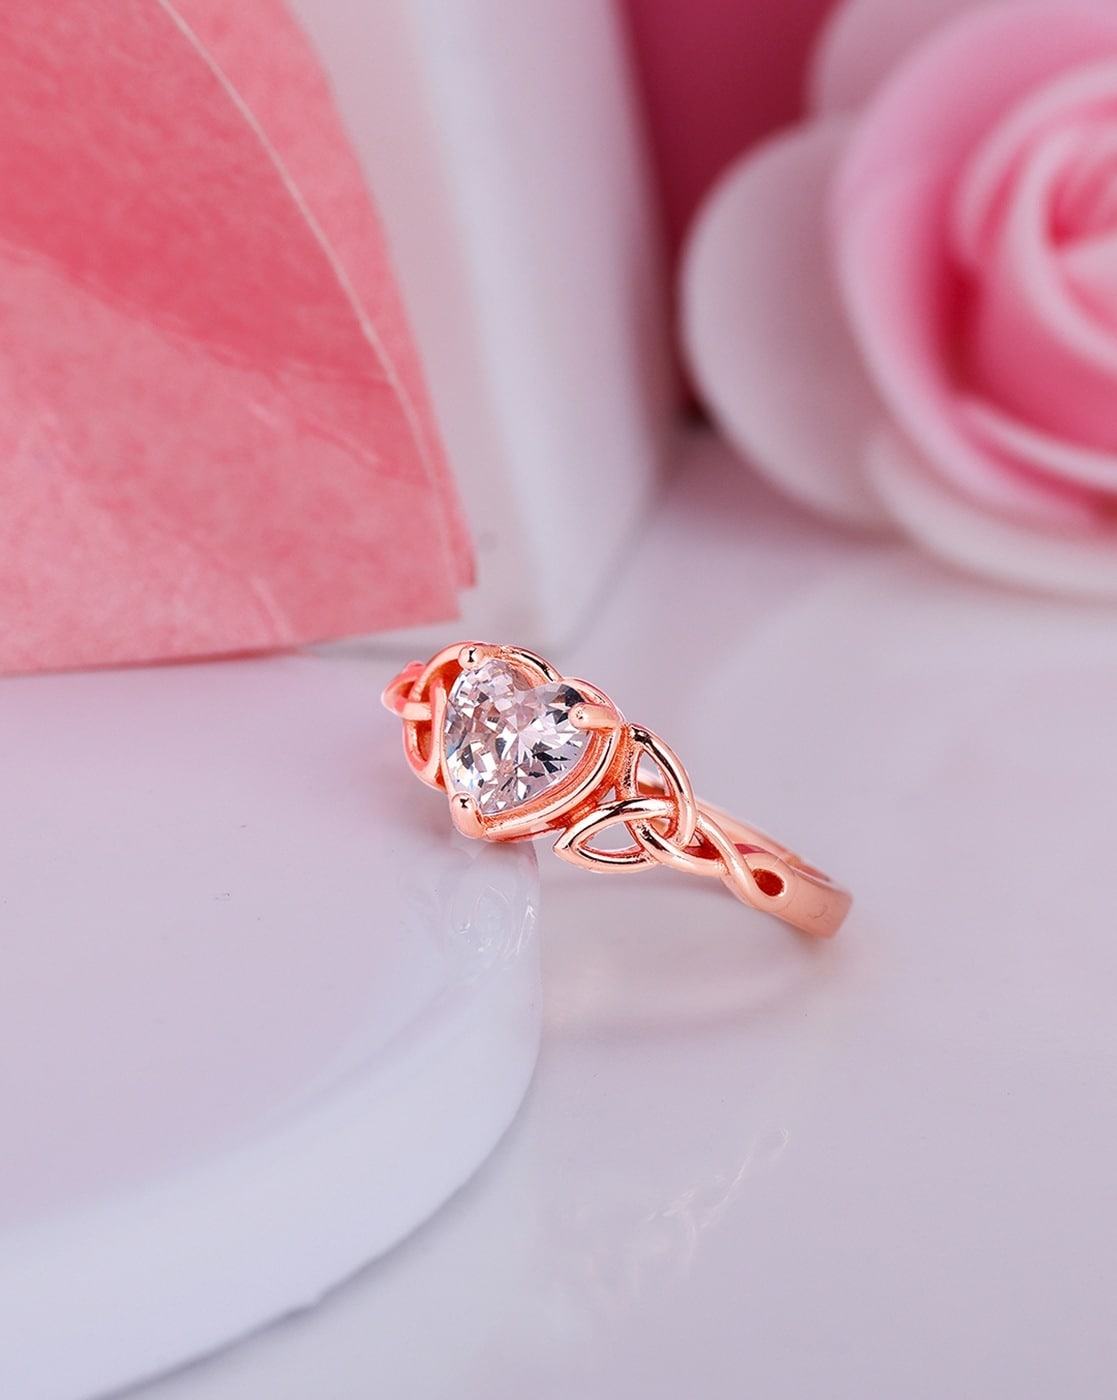 Buy Dainty & Simple 925 Sterling Silver Promise Ring for Her, Unique Art  Deco Womens Promise Ring, White Cz Womens Engagement Ring, Gift for Her  Online in India - Etsy